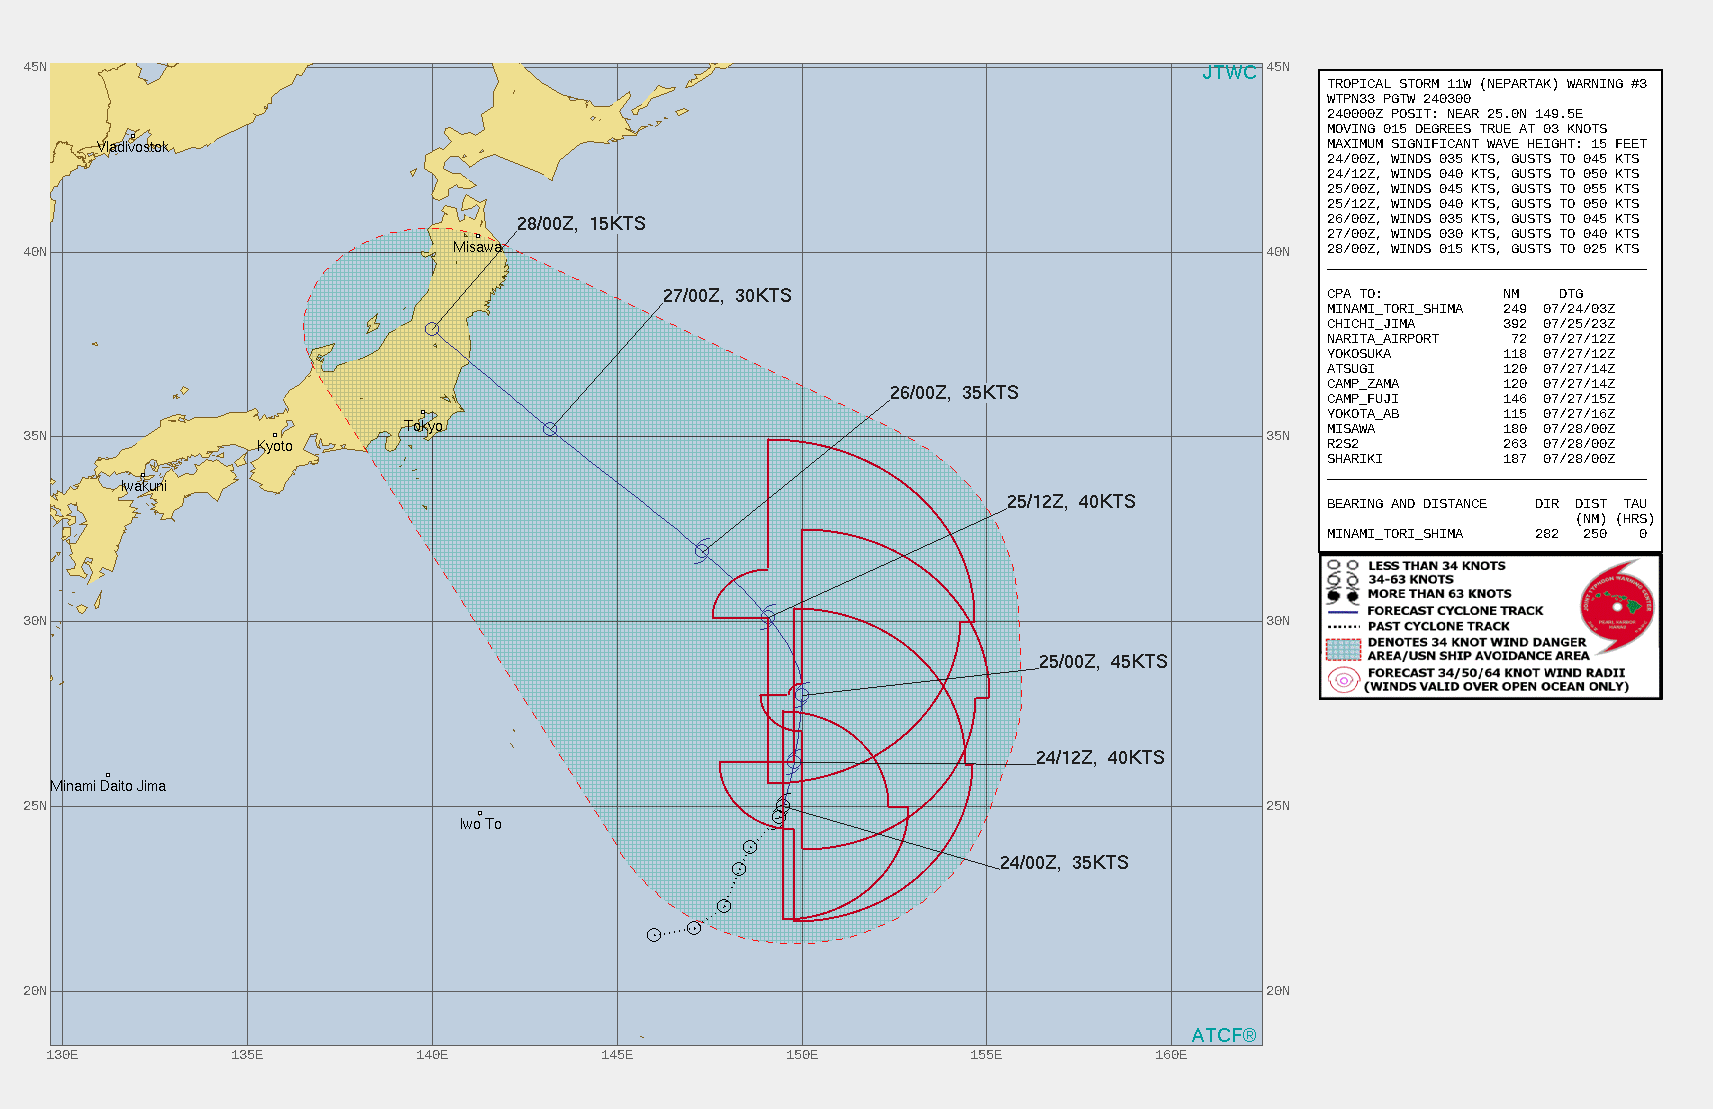 11W(NEPARTAK). WARNING 3 ISSUED AT 24/03UTC.THERE ARE NO SIGNIFICANT CHANGES TO THE FORECAST FROM THE PREVIOUS WARNING.  FORECAST DISCUSSION: TROPICAL STORM 11W IS A SUBTROPICAL SYSTEM AND NOT EXPECTED TO CHANGE INTO A WARM CORE BAROTROPIC (TYPICAL TROPICAL) SYSTEM. IT WILL NOT DEVELOP INTO A VIGOROUS STORM AND IS NOT EXPECTED TO REACH 50 KNOTS DURING ITS LIFE CYCLE. THE SYSTEM WILL MANANGE TO GENERATE SOME RAISED SURF FOR THE OLYMPIC SURFING EVENTS. ITS ORIGIN AT THE EASTERN EDGE OF A MONSOON GYRE PLACES IT WITHIN THE DIVERGENT REGION OF A DEEP SUBTROPICAL TROUGH WITH EXCELLENT EQUATORWARD OUTFLOW BUT HIGH VERTICAL WIND SHEAR, WHILE THE HIGH LATITUDE OF FORMATION PRECLUDES MOVEMENT THROUGH A ZONE WITH ADEQUATE SEA SURFACE TEMPERATURES BUT LOW OCEAN HEAT CONTENT. THE POINT OF RECKONING IN THE FORECAST WILL COME AS THE STORM CROSSES THE 30TH LATITUDE, WHERE IT A BUILDING SUBTROPICAL RIDGE WILL FORCE THE THE STORM TO TURN TO A WESTWARD TRACK TOWARDS HONSHU. AS THE STORM MAKES THE TURN, THE CERTAINTY OF WHERE THE STORM WILL COME ASHORE WILL INCREASE SHARPLY. UNTIL WE SEE THE STORM ROUND THAT TURN, FORECAST TRACK UNCERTAINTY WILL REMAIN HIGH.